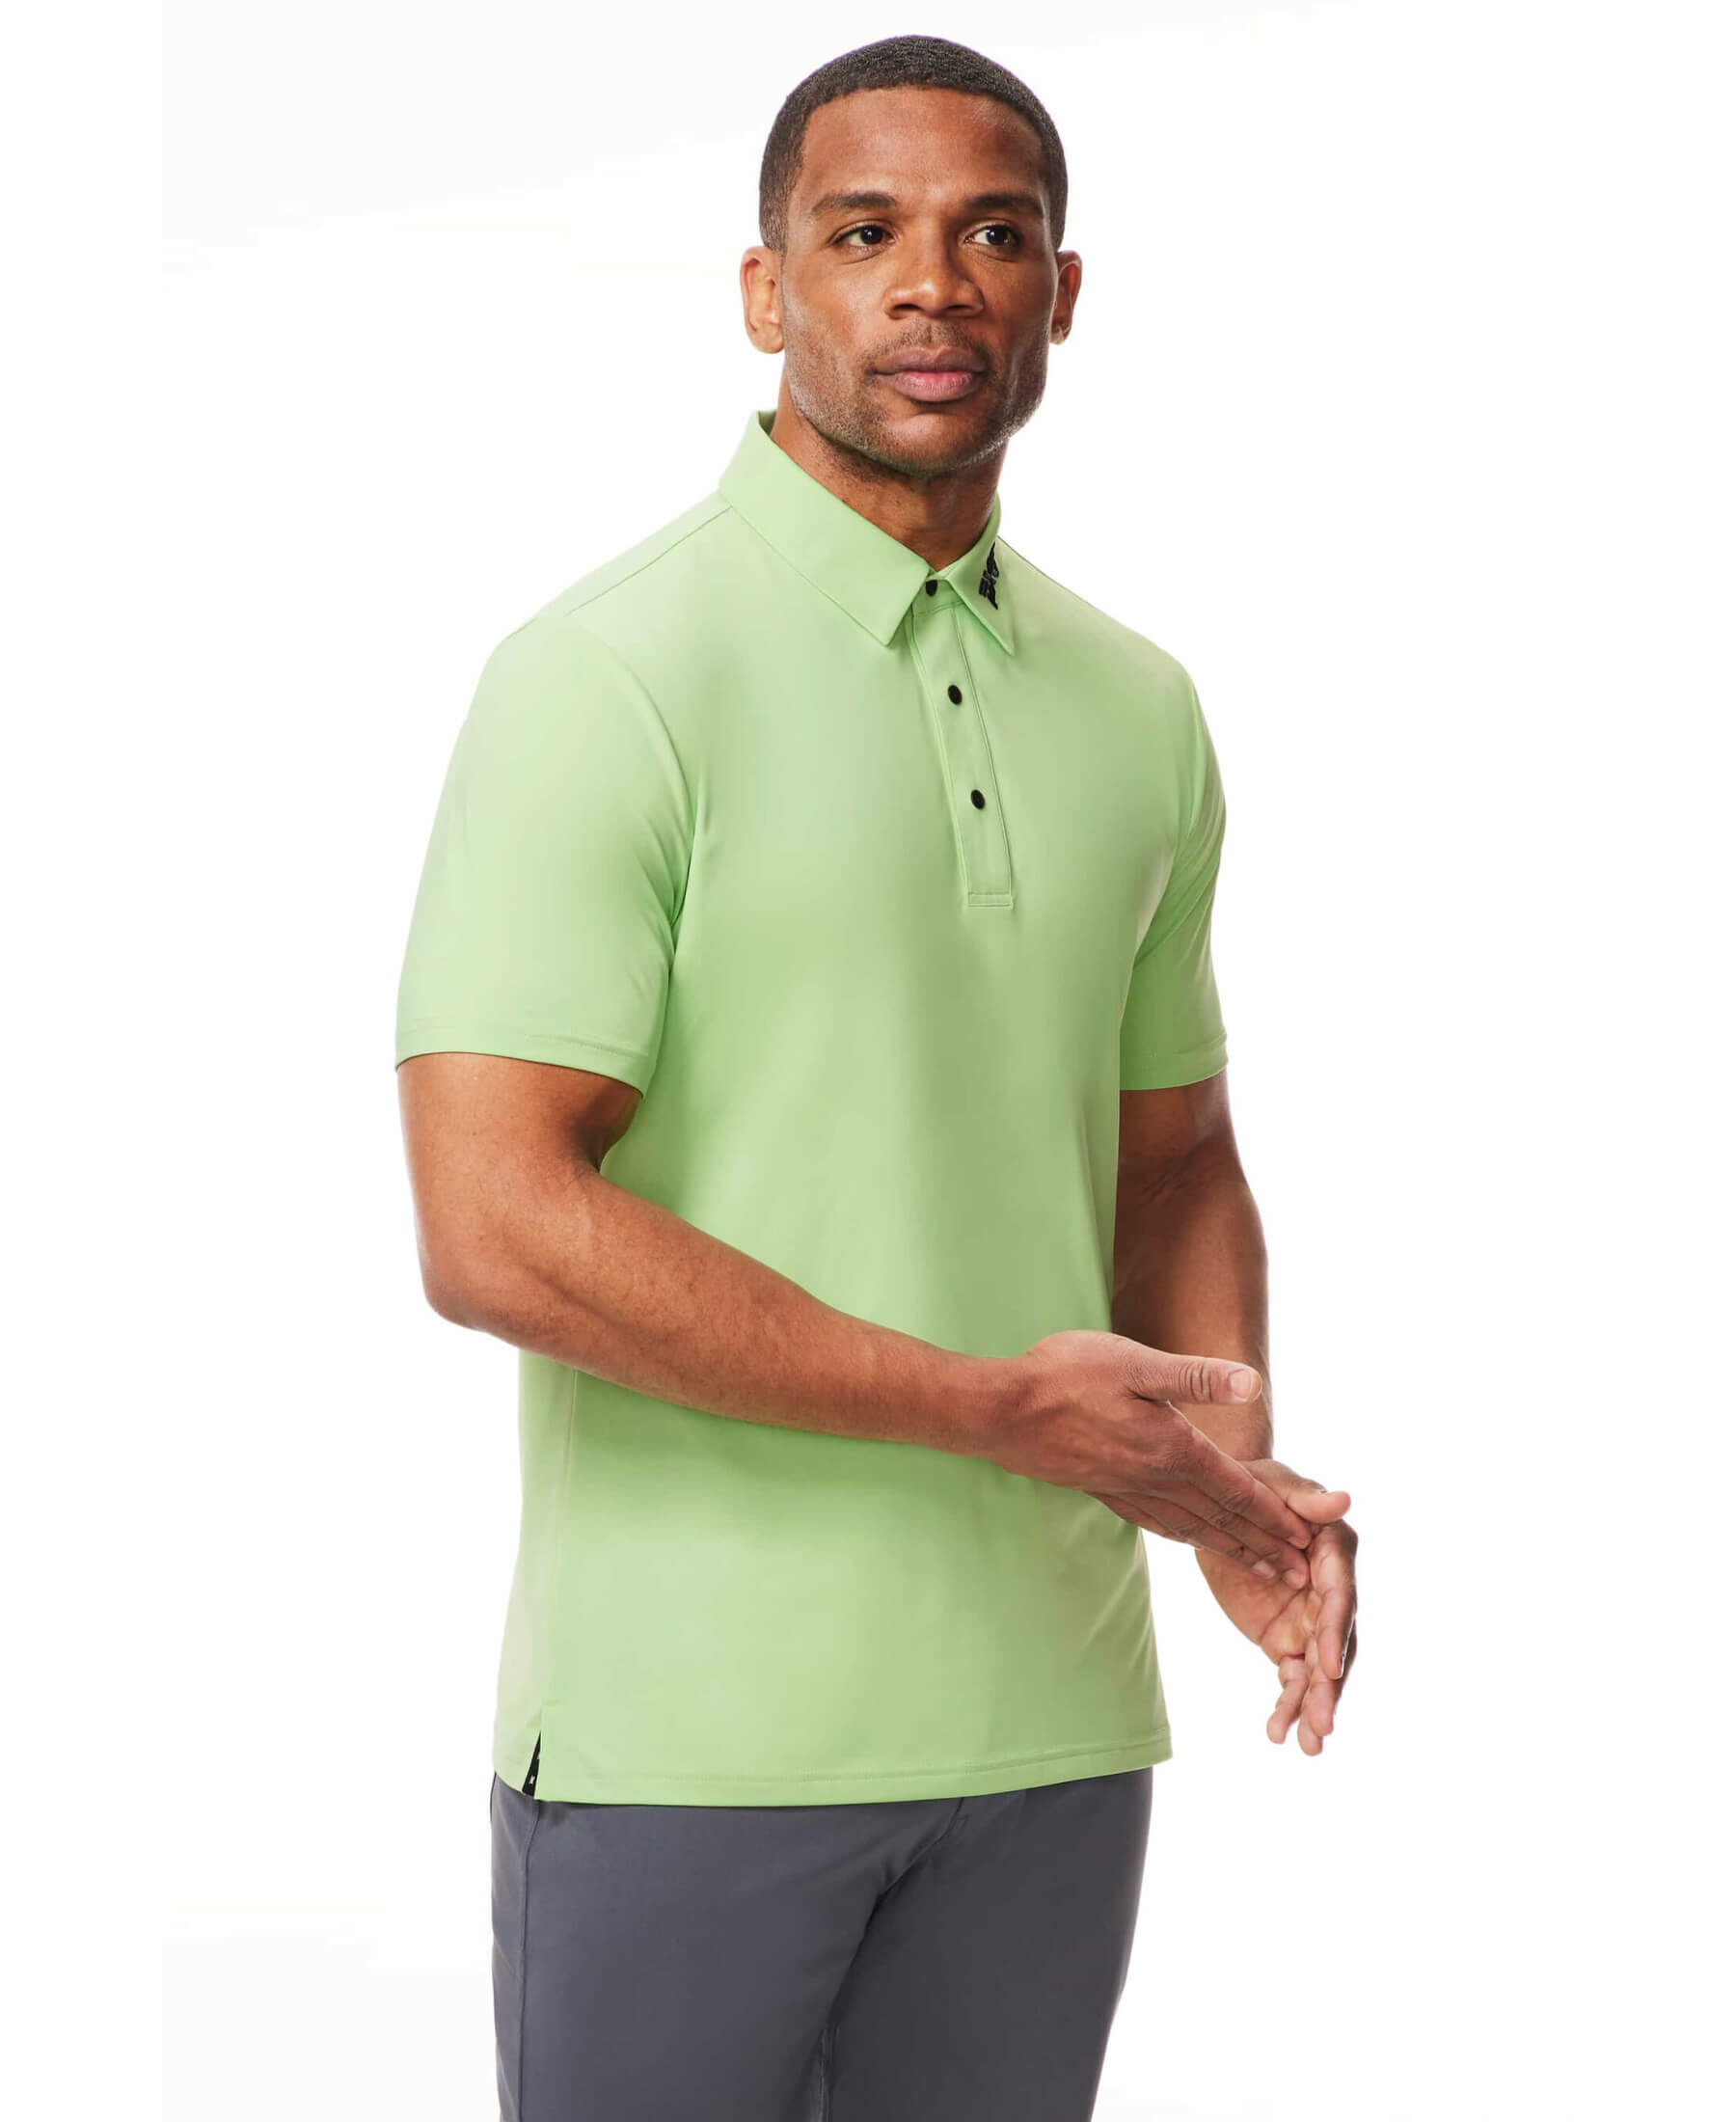 Athletic Fit BP Signature Polo | Shop the Highest Quality Golf Apparel ...